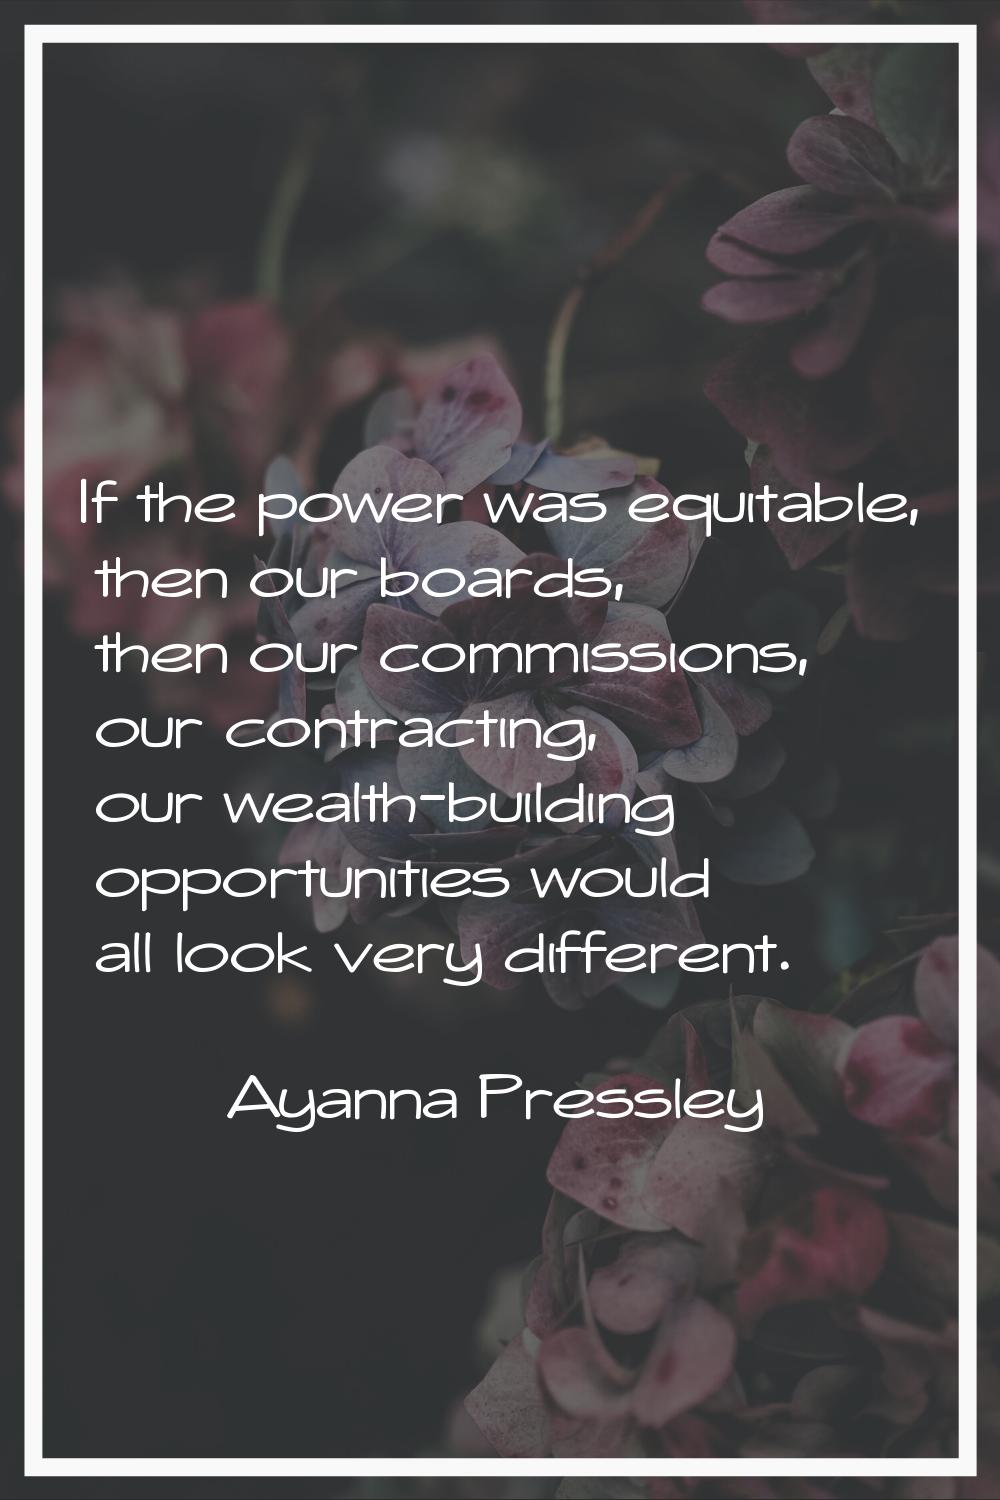 If the power was equitable, then our boards, then our commissions, our contracting, our wealth-buil